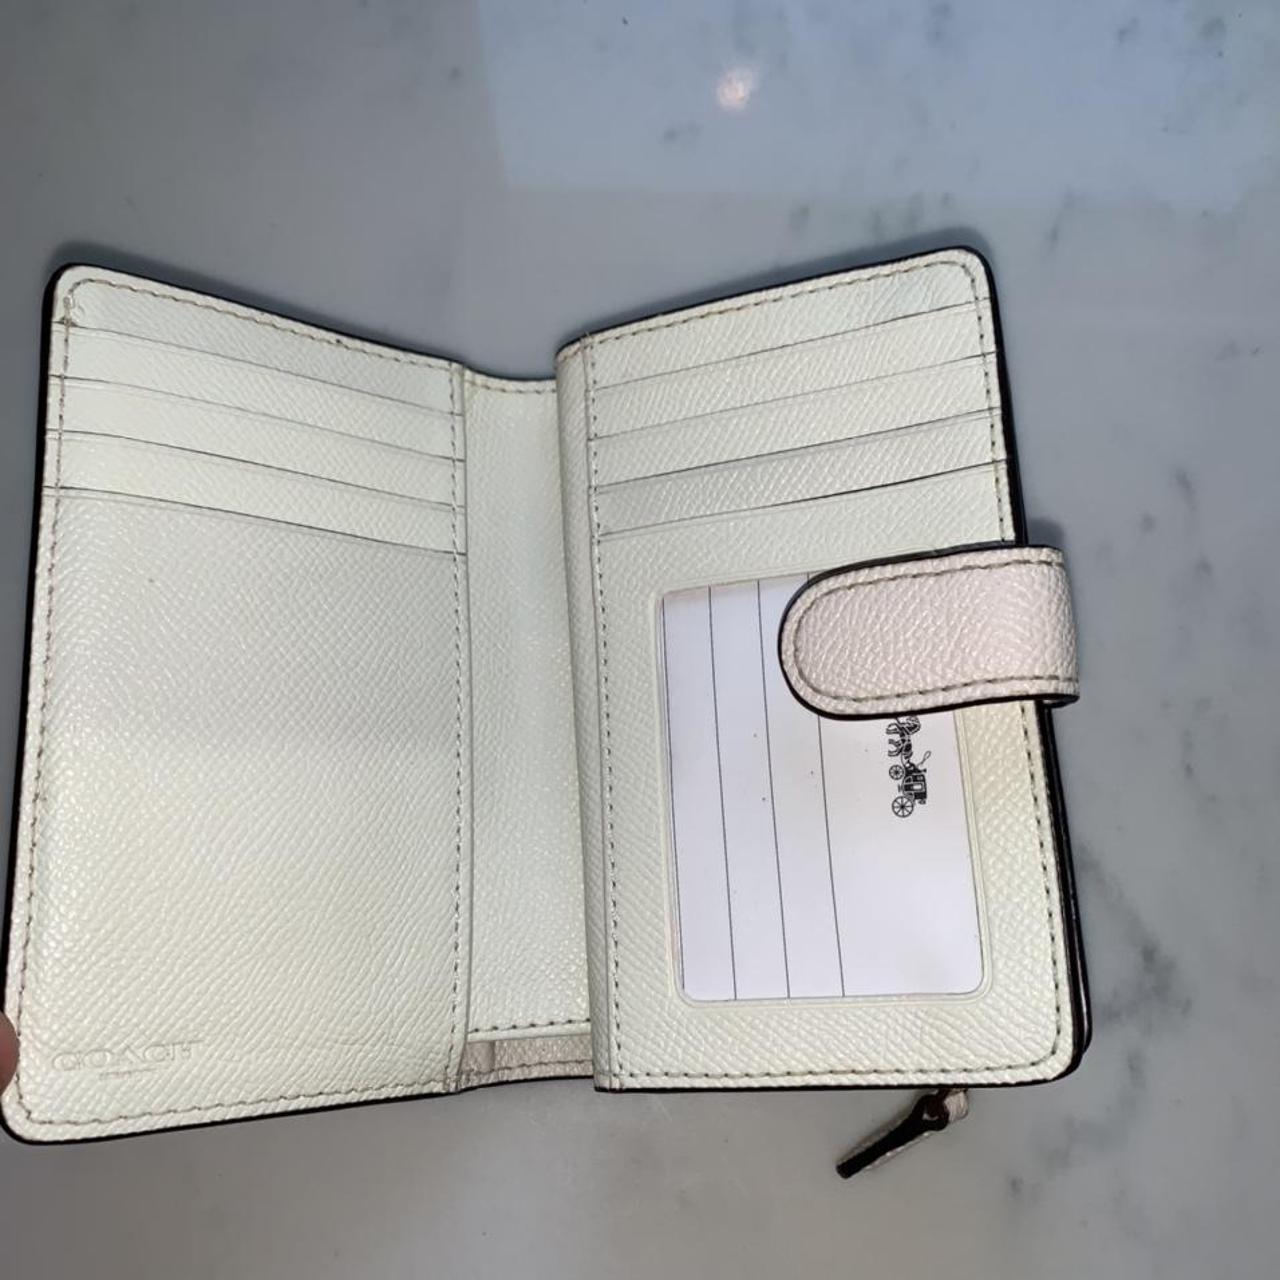 Product Image 2 - WHITE COACH wallet/clutch! 🤍🤍🤍
Gold trim.